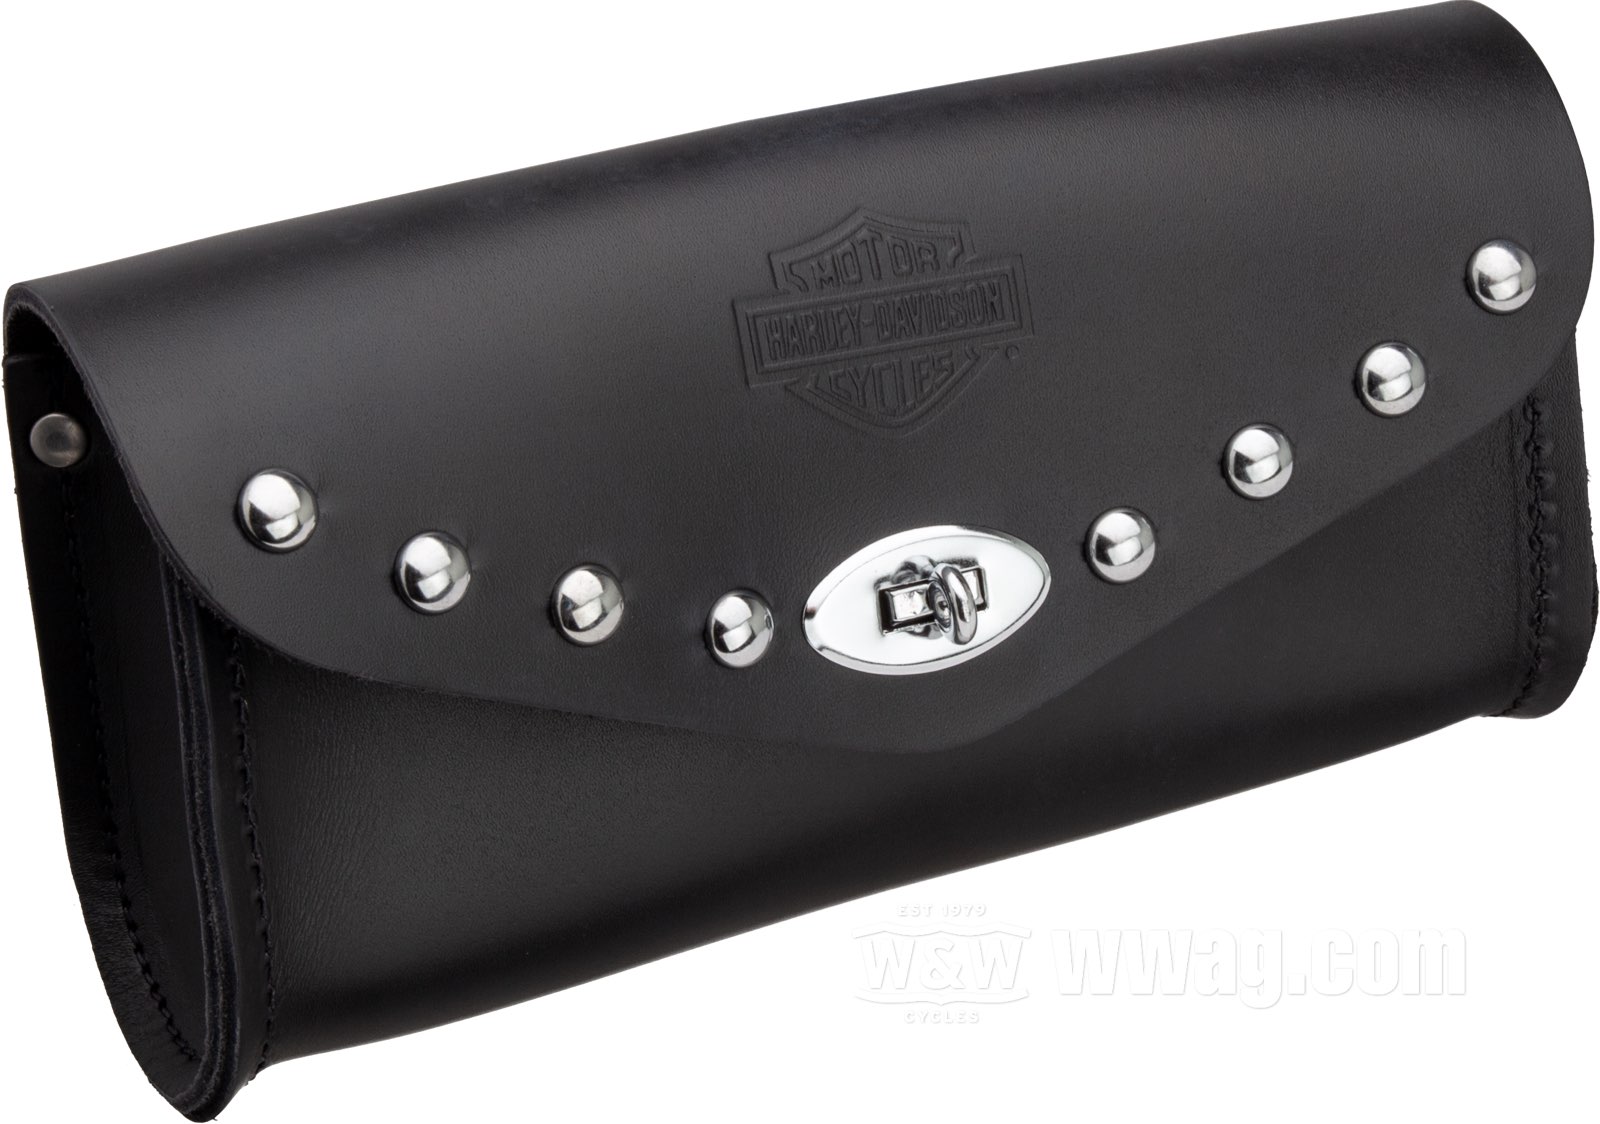 W&W Cycles - Bar & Shield Windshield Bags for Harley-Davidson